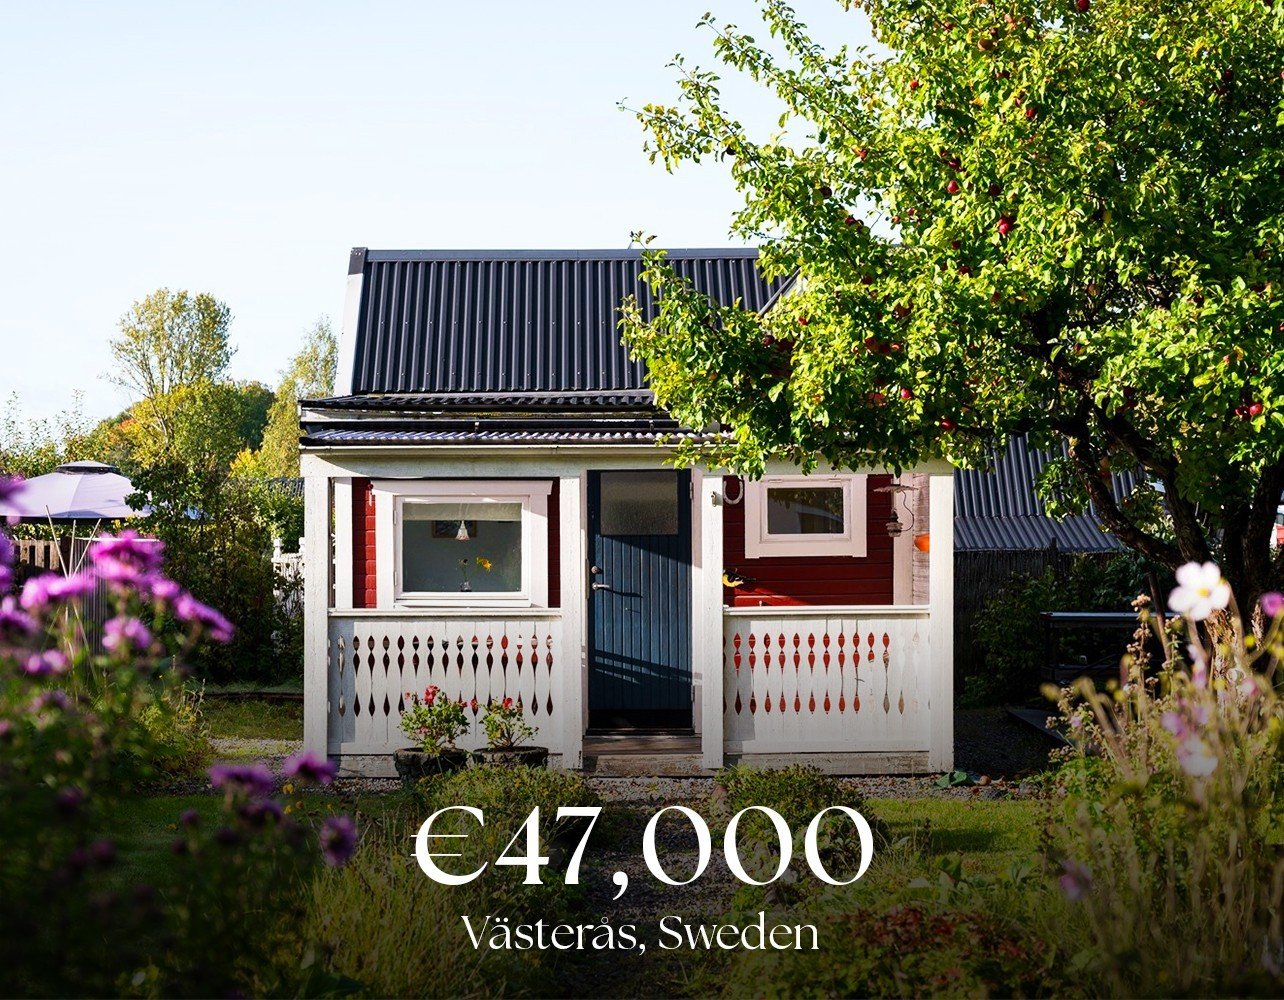 Small home for a small price! V&auml;ster&aring;s, where this charming fritidshus awaits. Step inside this super cute 20sqm space, complete with all the amenities you need and a petite bedroom to boot. But we have a feeling you'd spend most of your t